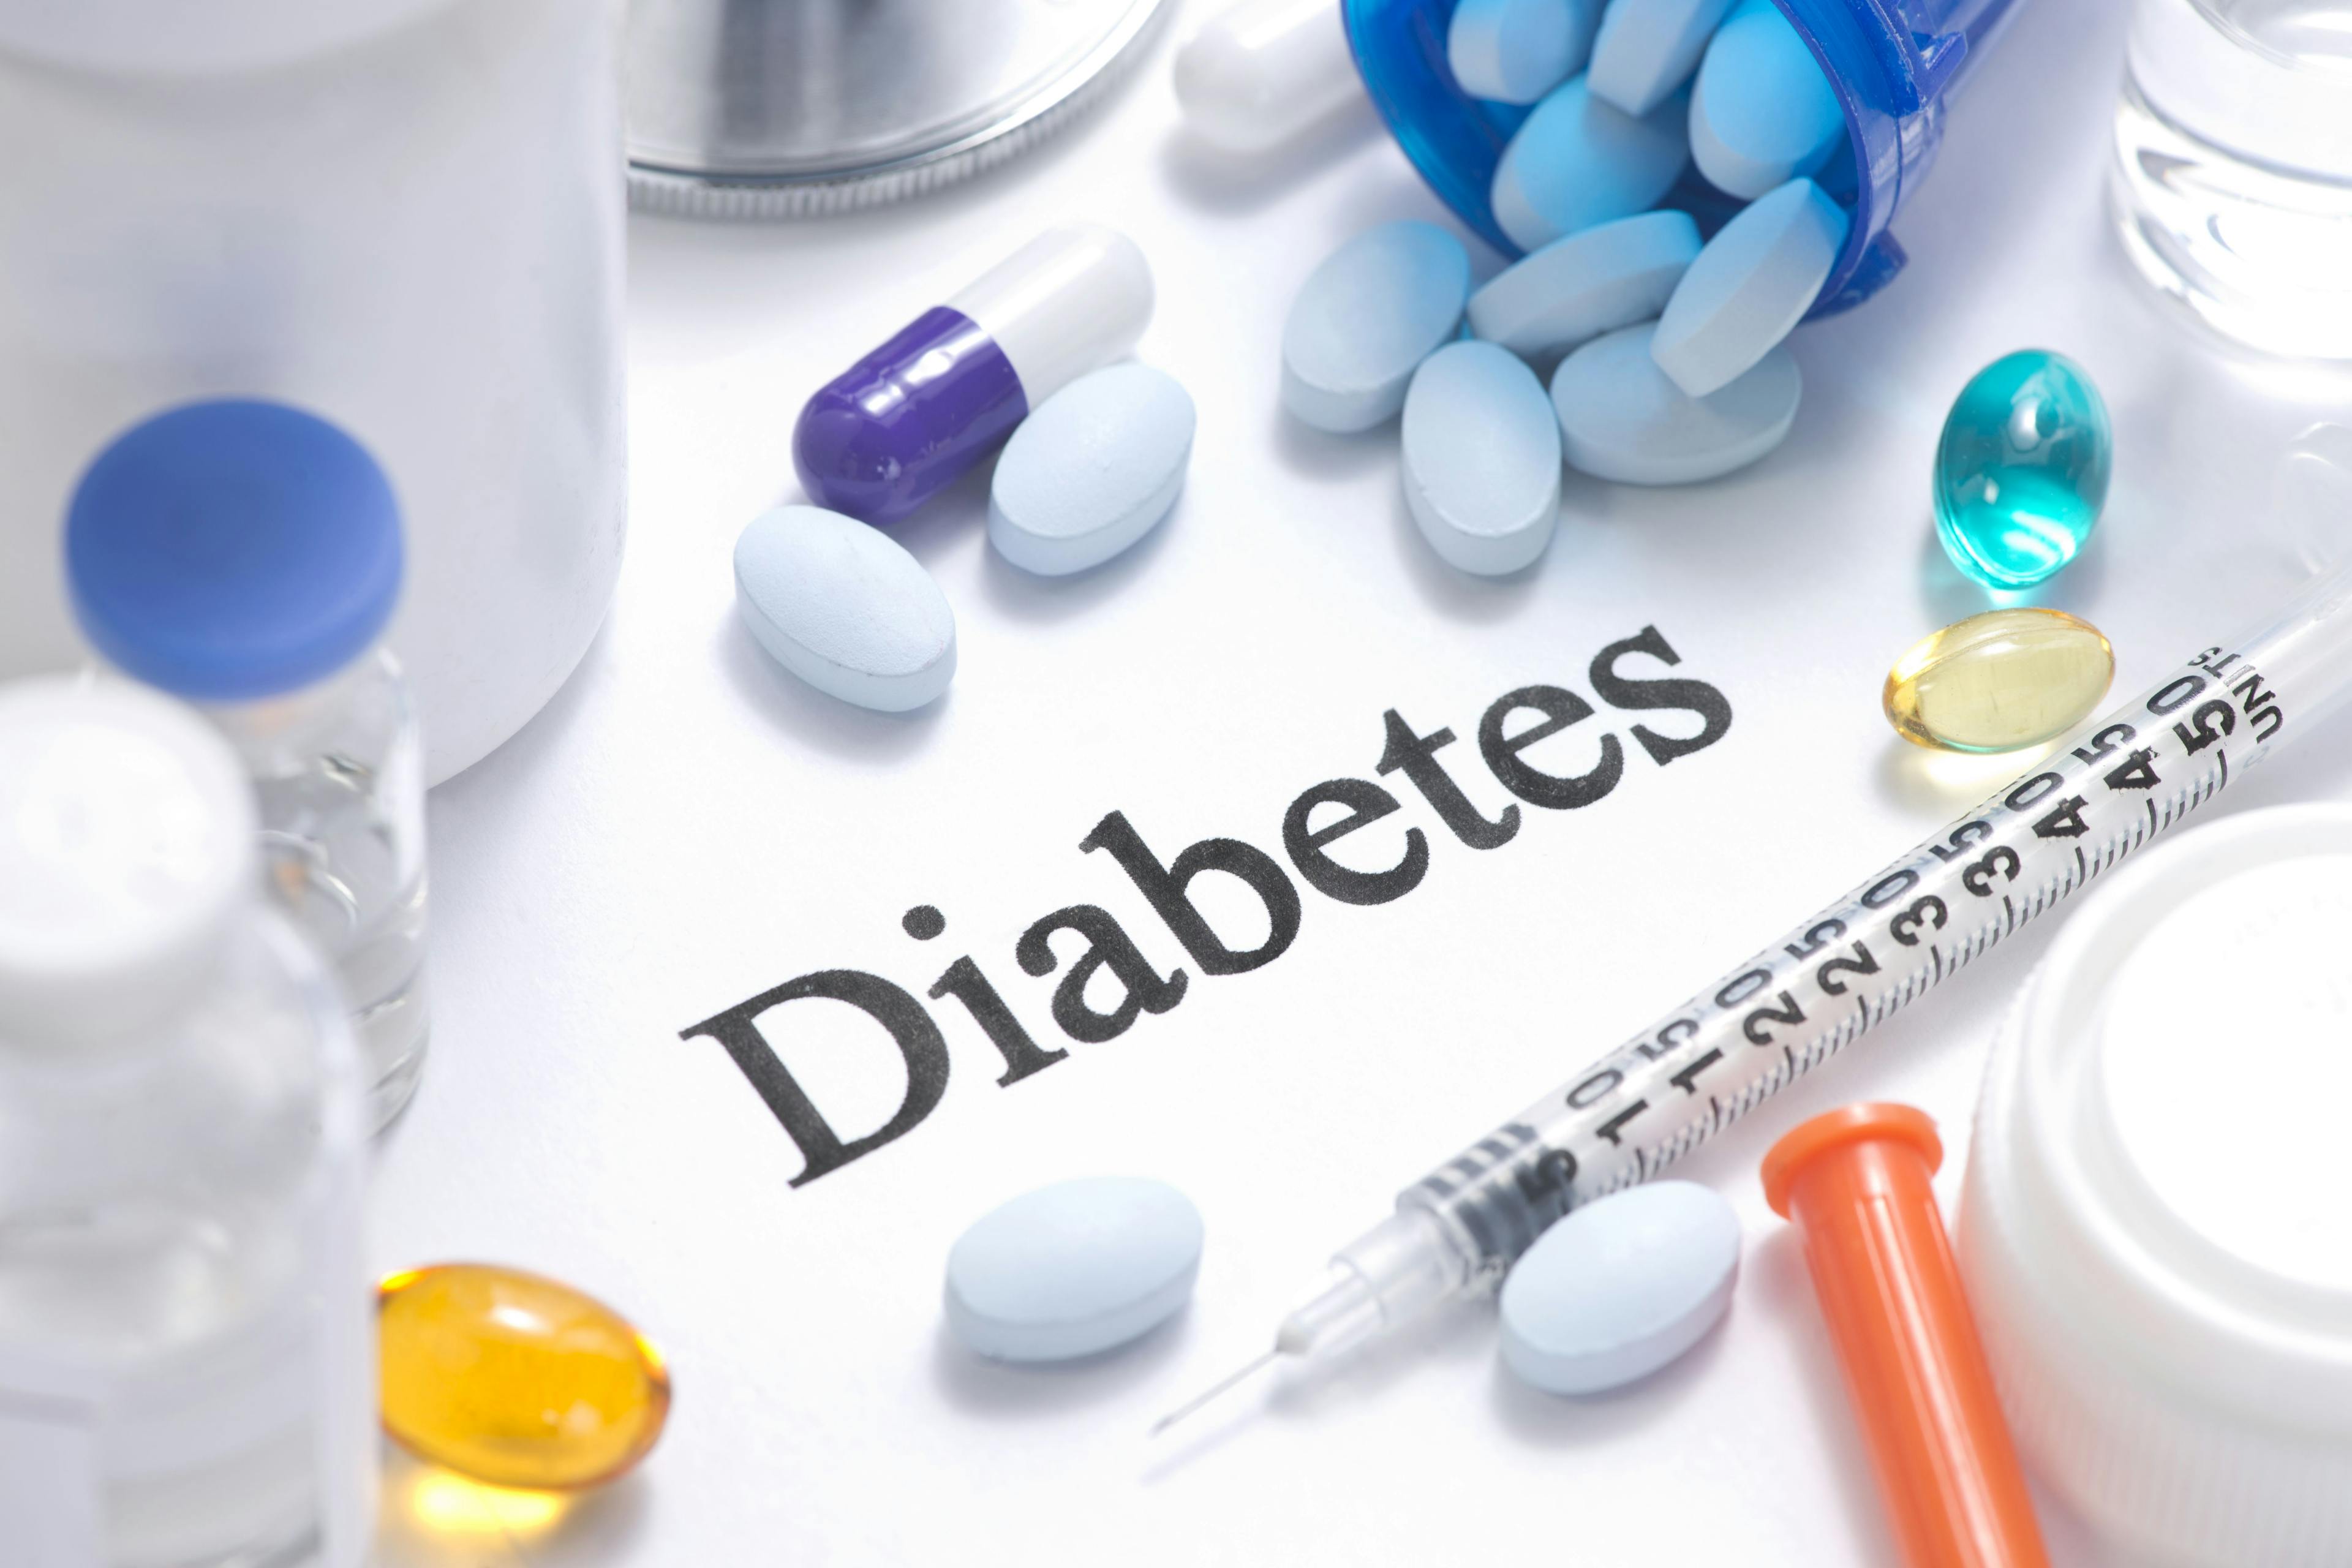 Stock imagery related to diabetes and endocrine disorders